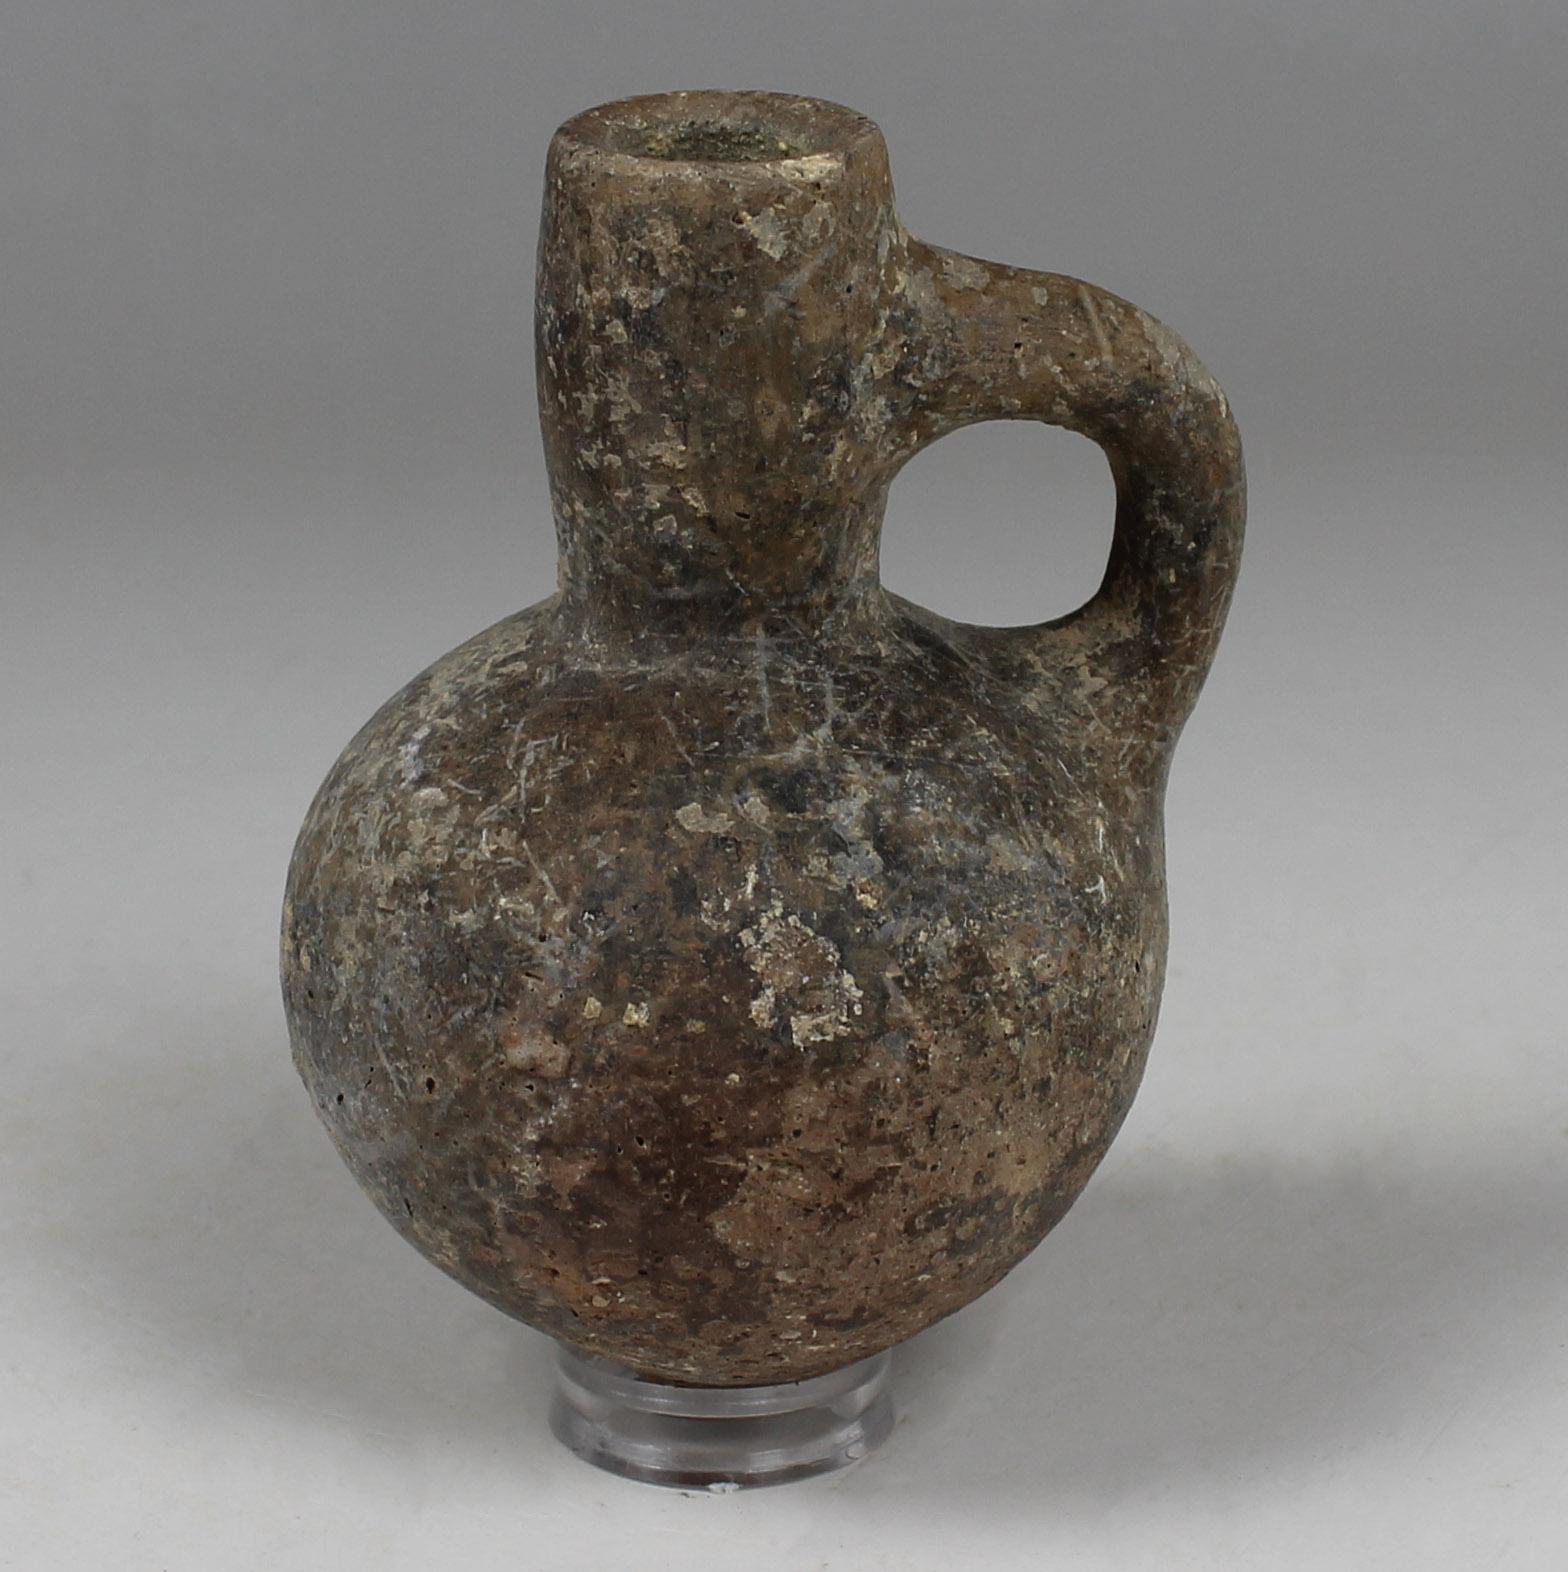 ITEM: Black juglet
MATERIAL: Pottery
CULTURE: Iron Age
PERIOD: 700 – 586 B.C
DIMENSIONS: 95 mm x 67 mm
CONDITION: Good condition
PROVENANCE: Ex Jerusalem private collection, acquired between 1975 – 1990.
PARALLEL: AMIRAN, R., Ancient Pottery of the